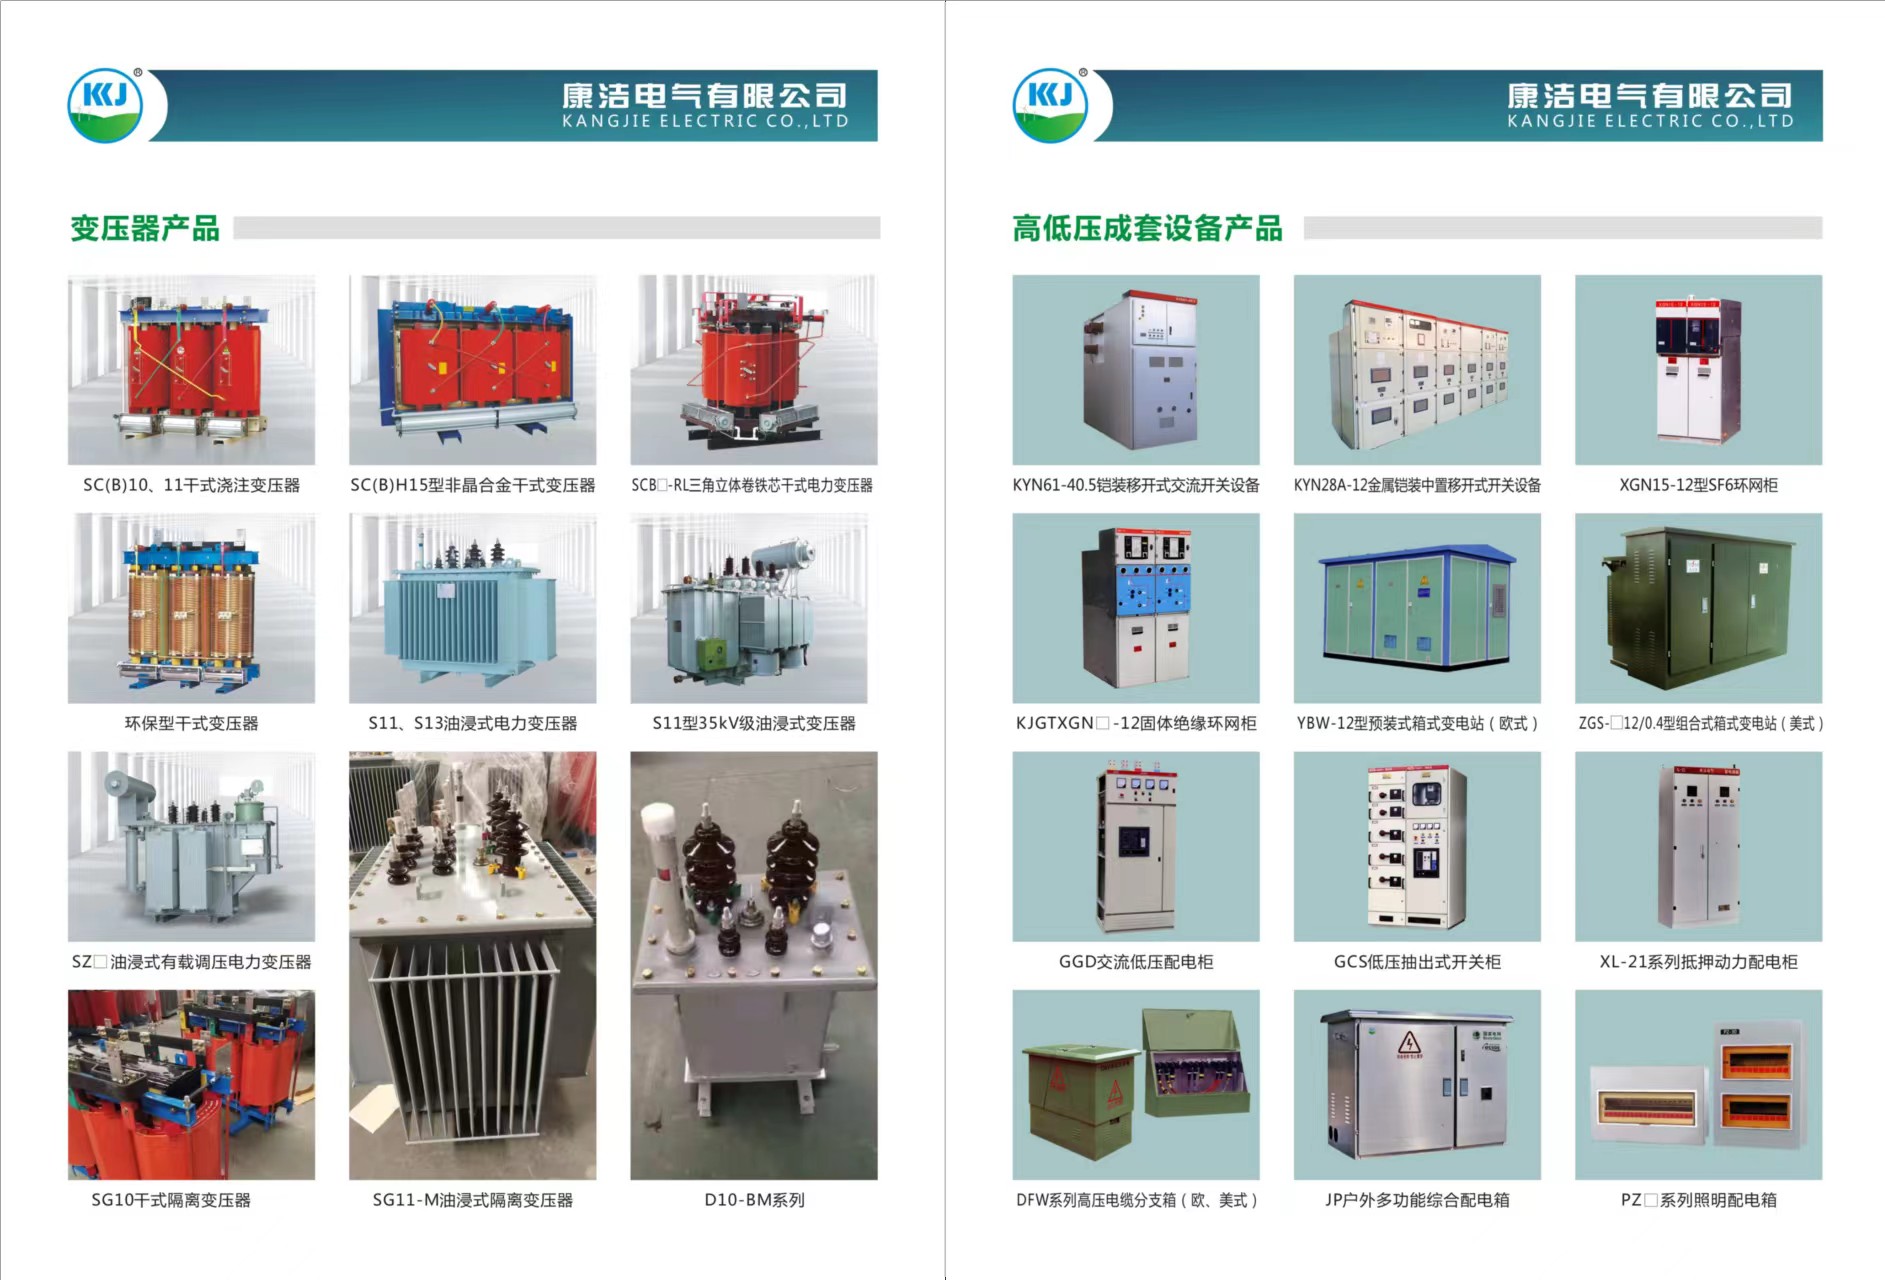 High and low distribution cabinets